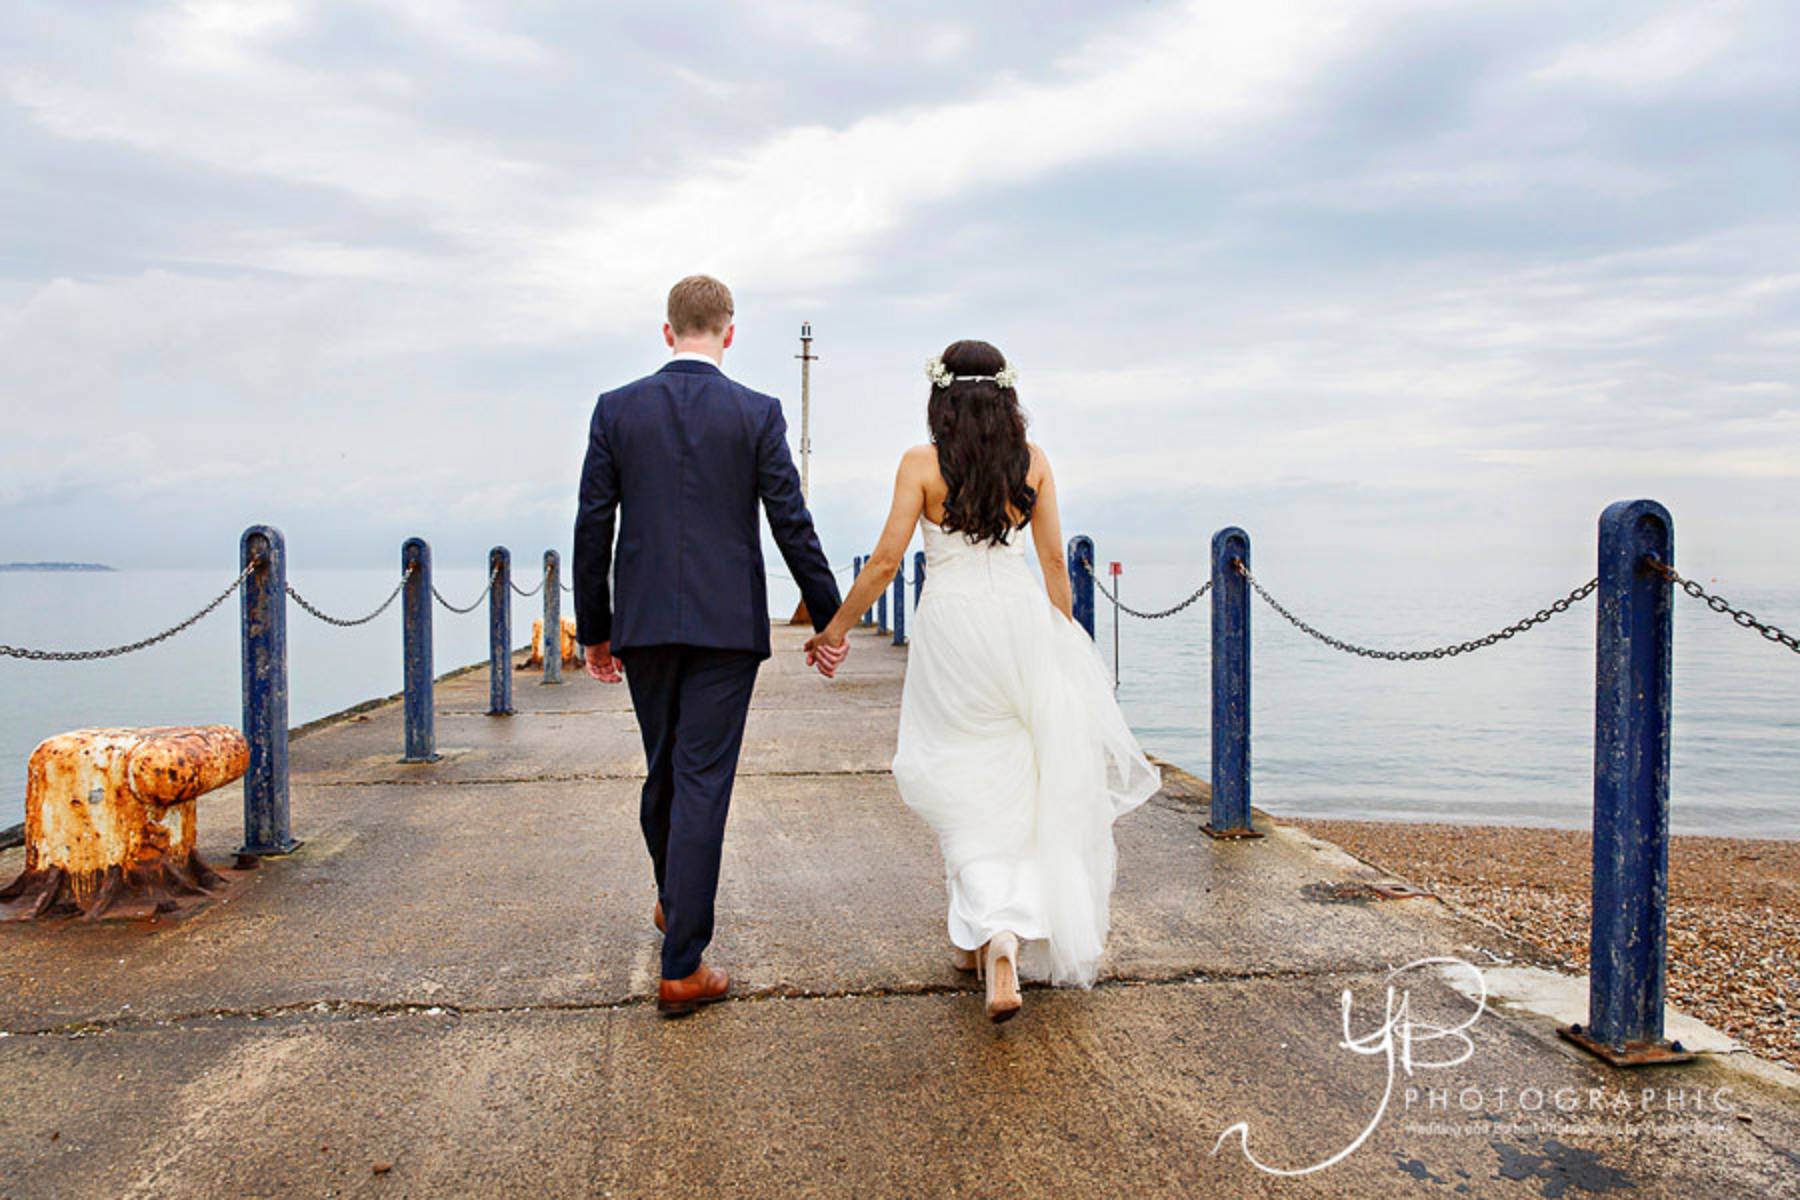 Seaside Wedding Photos in Whistable by YBPHOTOGRAPHIC